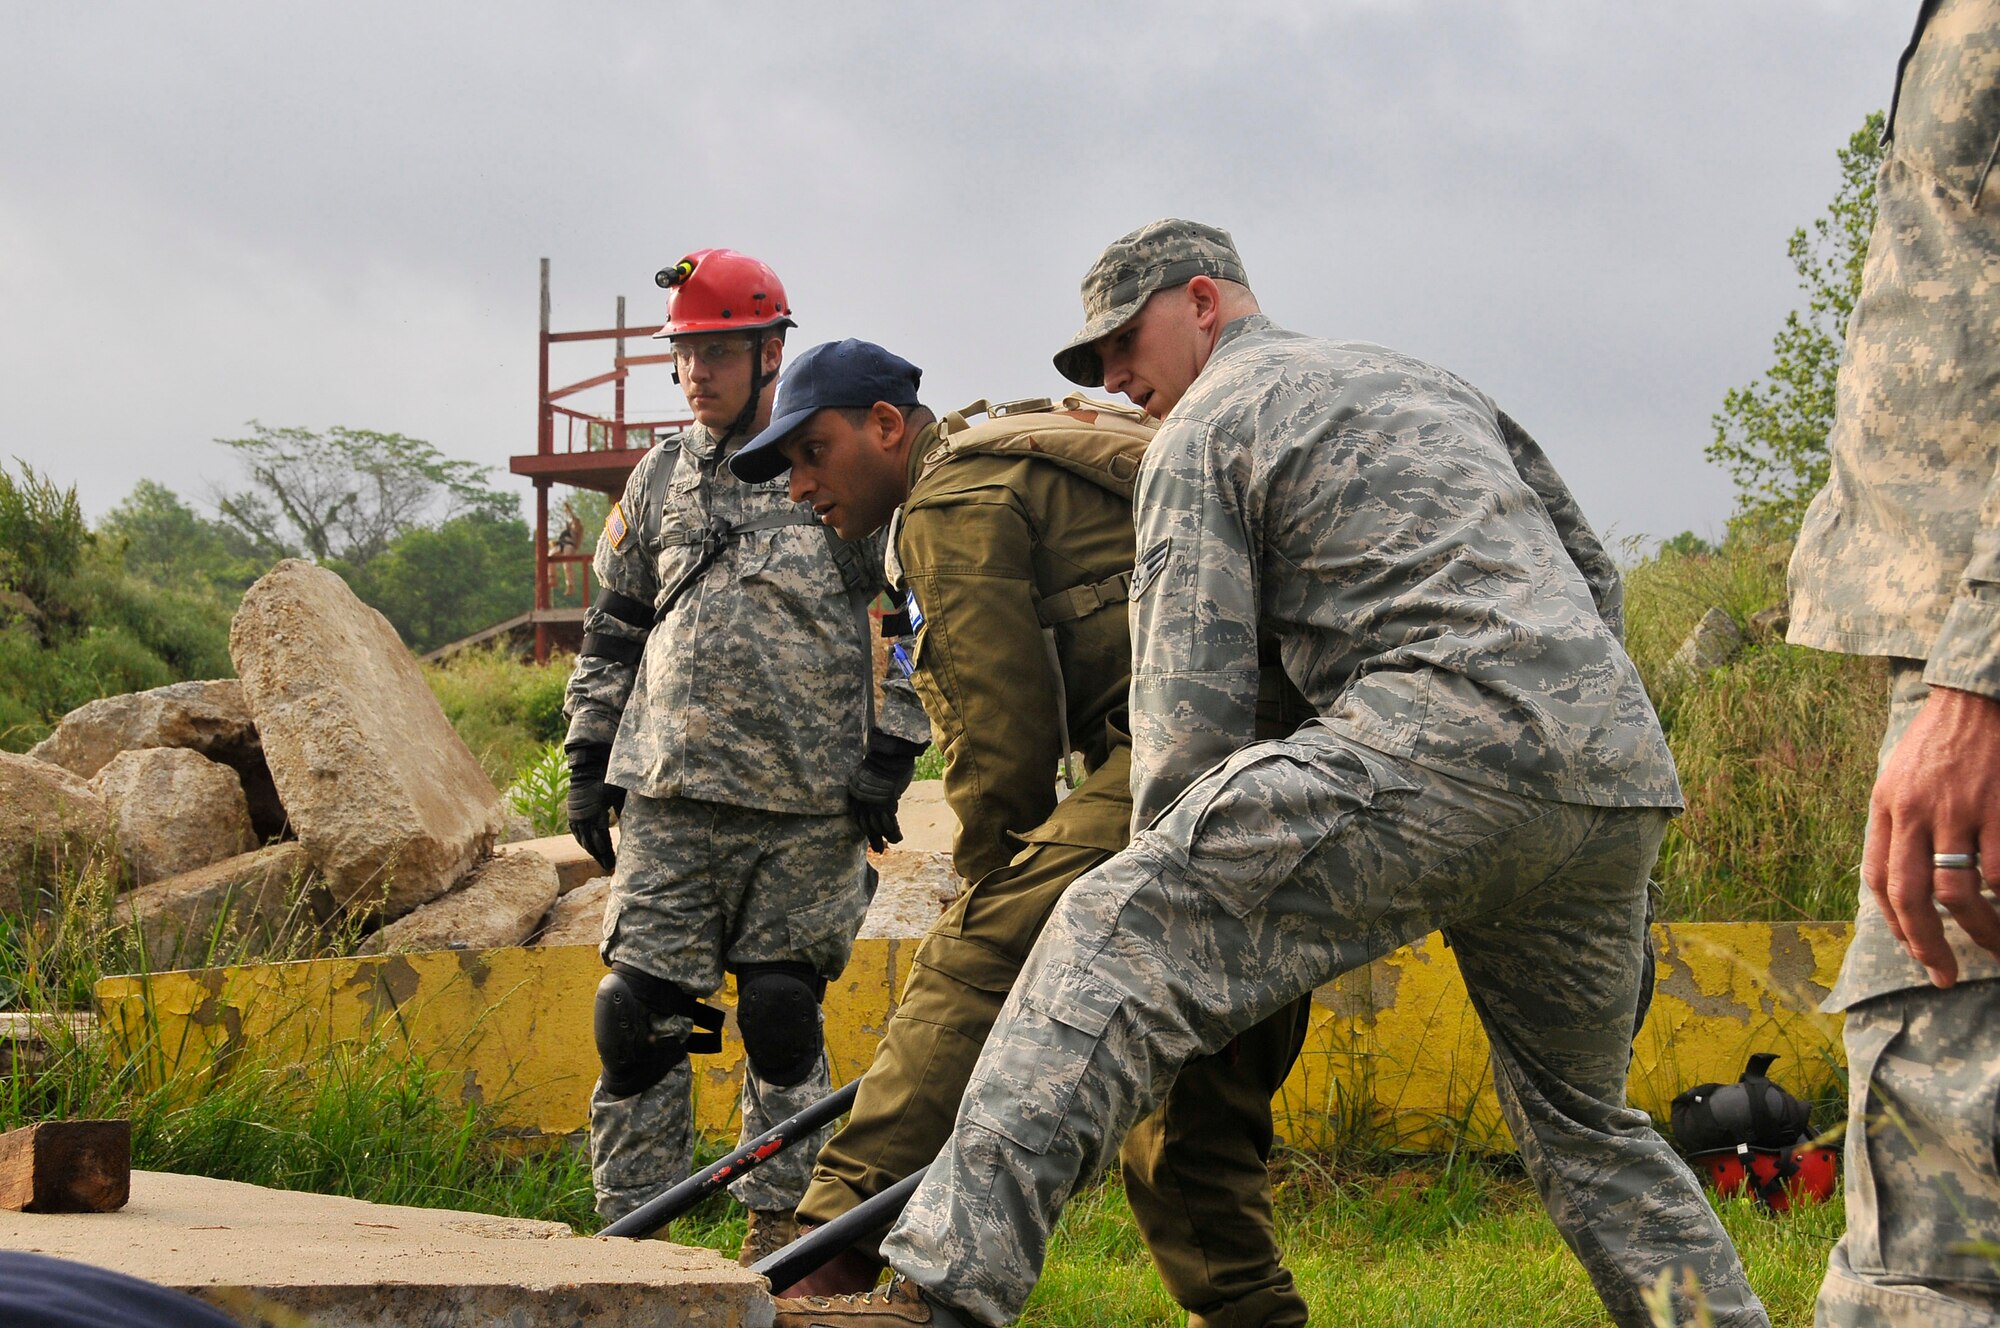 Air Force Senior Airman Cody W. Eslick, 181st Intelligence Wing, 19th CERFP, along with an Israeli soldier, use a crowbar to lift and move heavy slabs of concrete at Camp Atterbury, Edinburgh, Ind., June 10, 2013. The training conducted at Camp Atterbury involved Air and Army Guardsmen, Bloomington Fire Department and Israelis Search and Rescue team in an exercise called United Front II. (U.S. Air National Guard photo by Senior Master Sgt. John S. Chapman/Released)